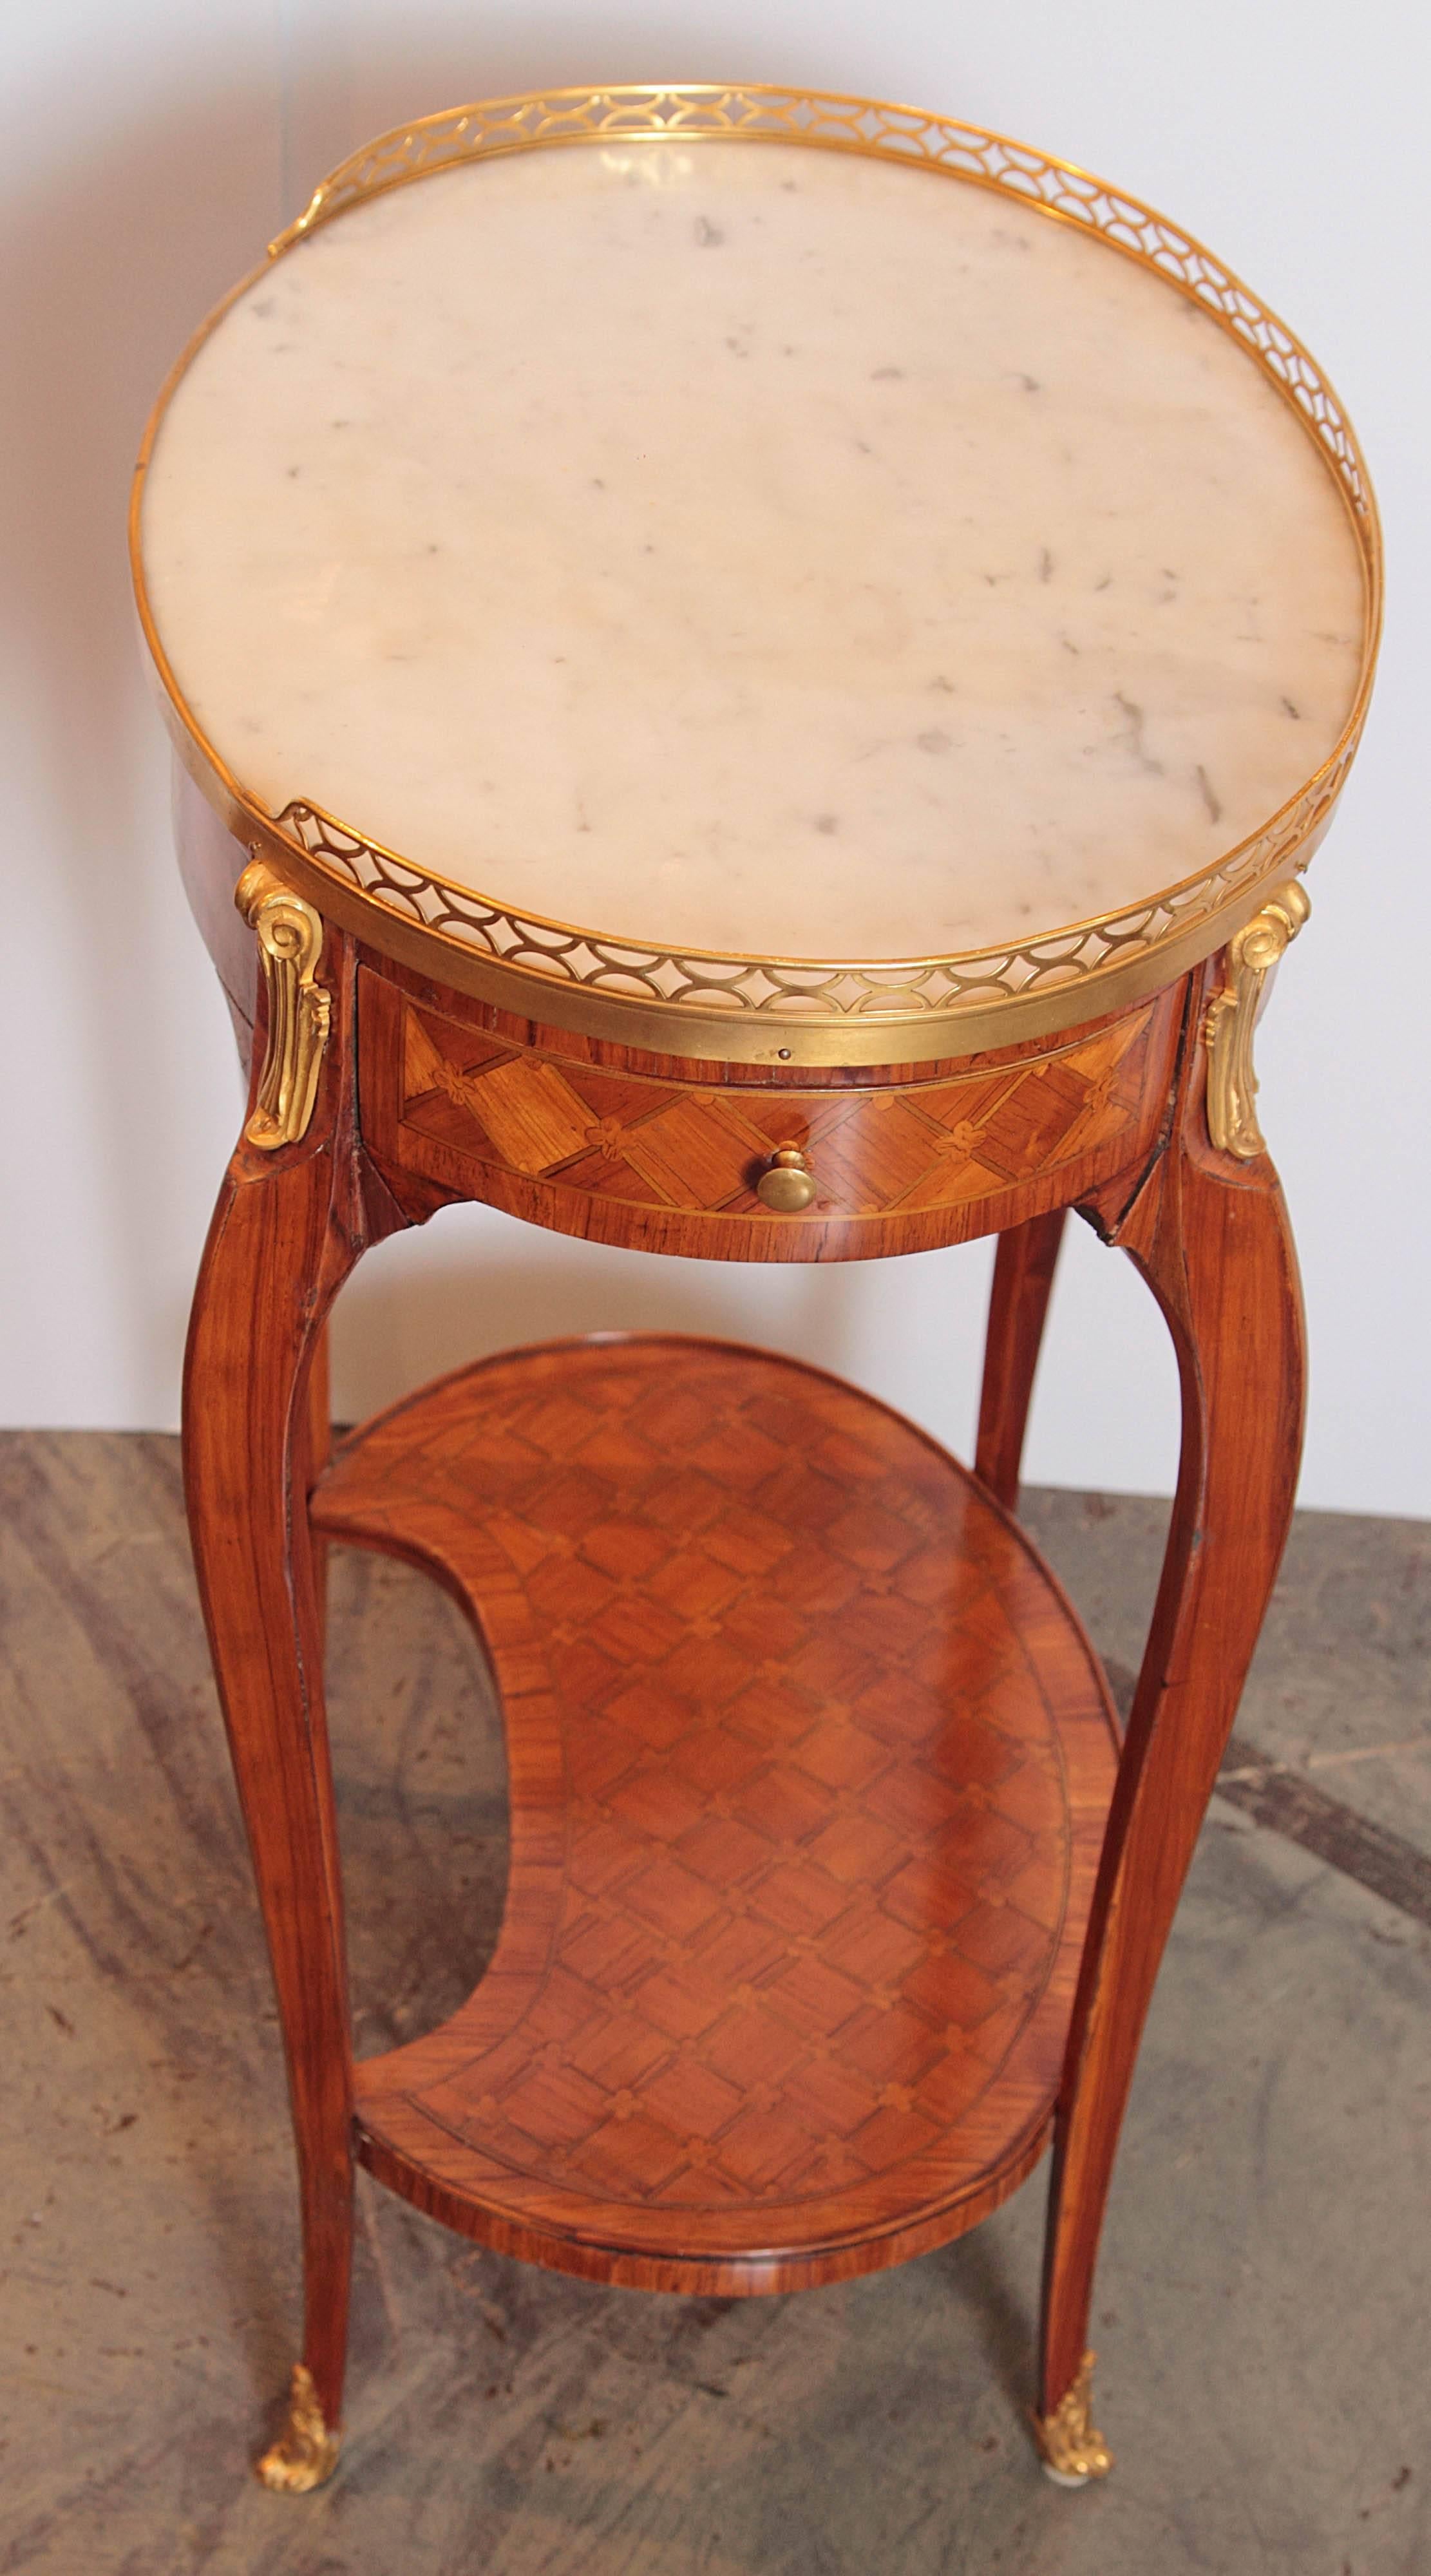 Pair of French Louis XVI Kingwood Parquetry Side Tables, Early 19th Century 5